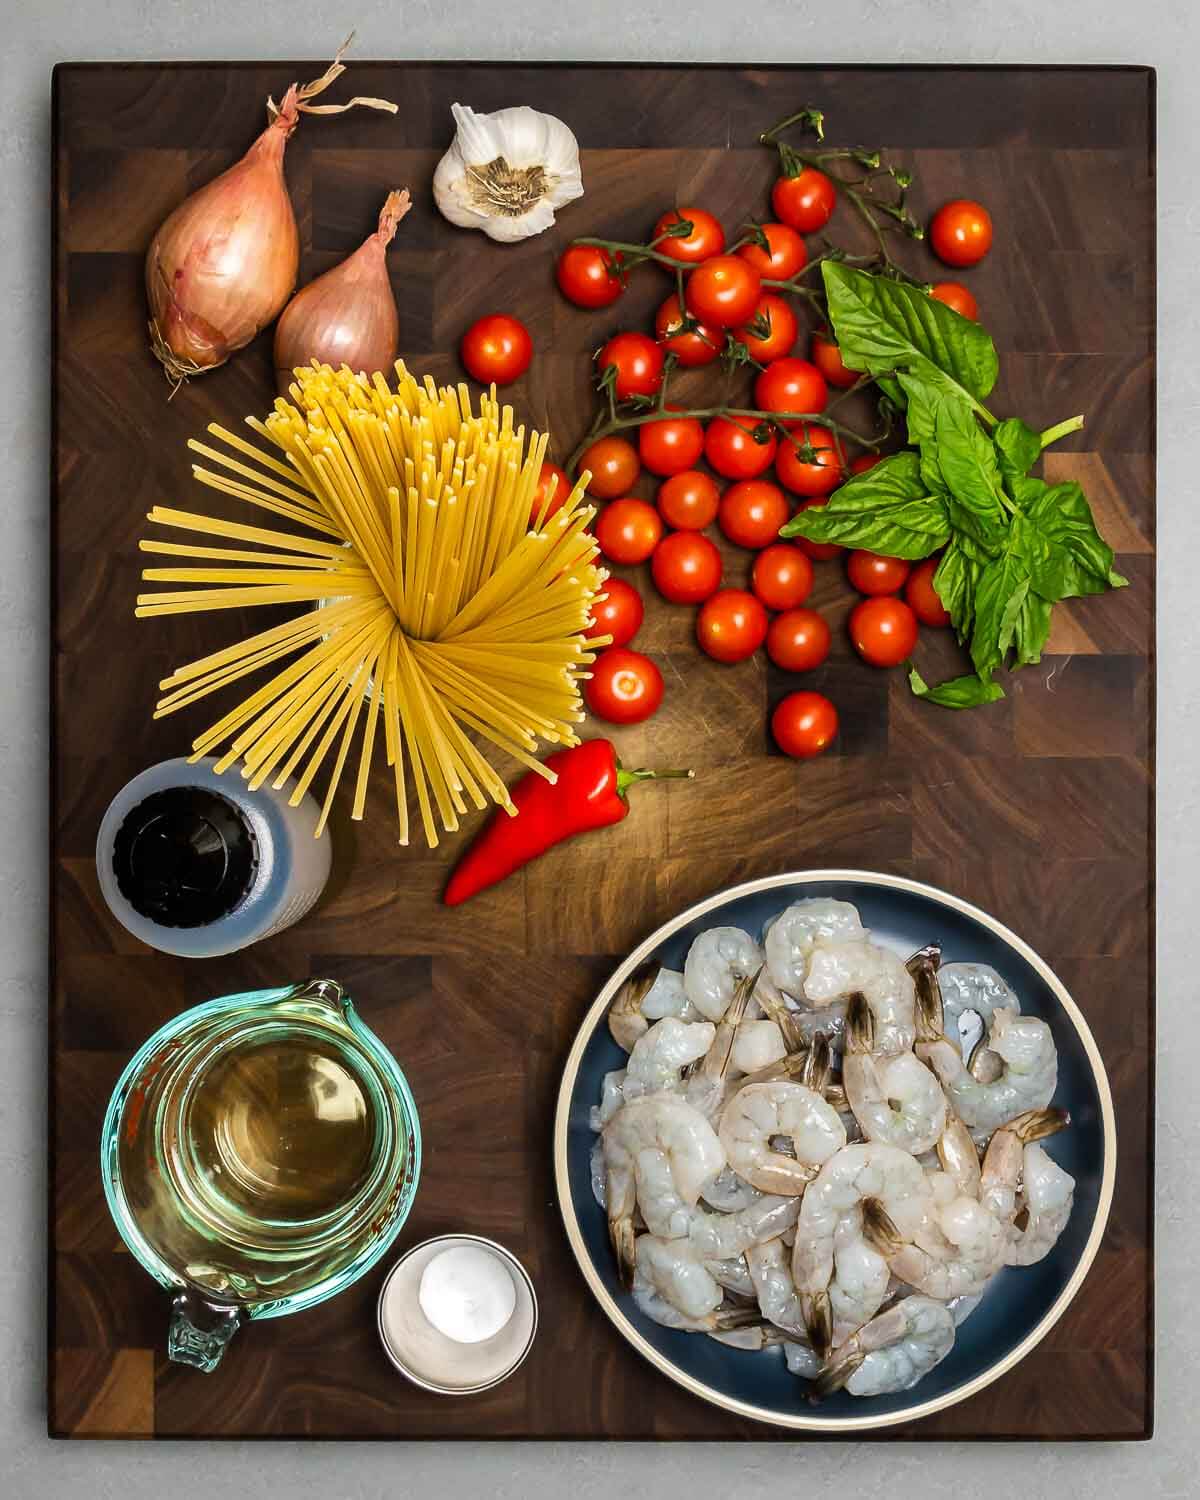 Ingredients shown: shallots, garlic, cherry tomatoes, basil, linguine, chile pepper, olive oil, white wine, baking soda, and shrimp.